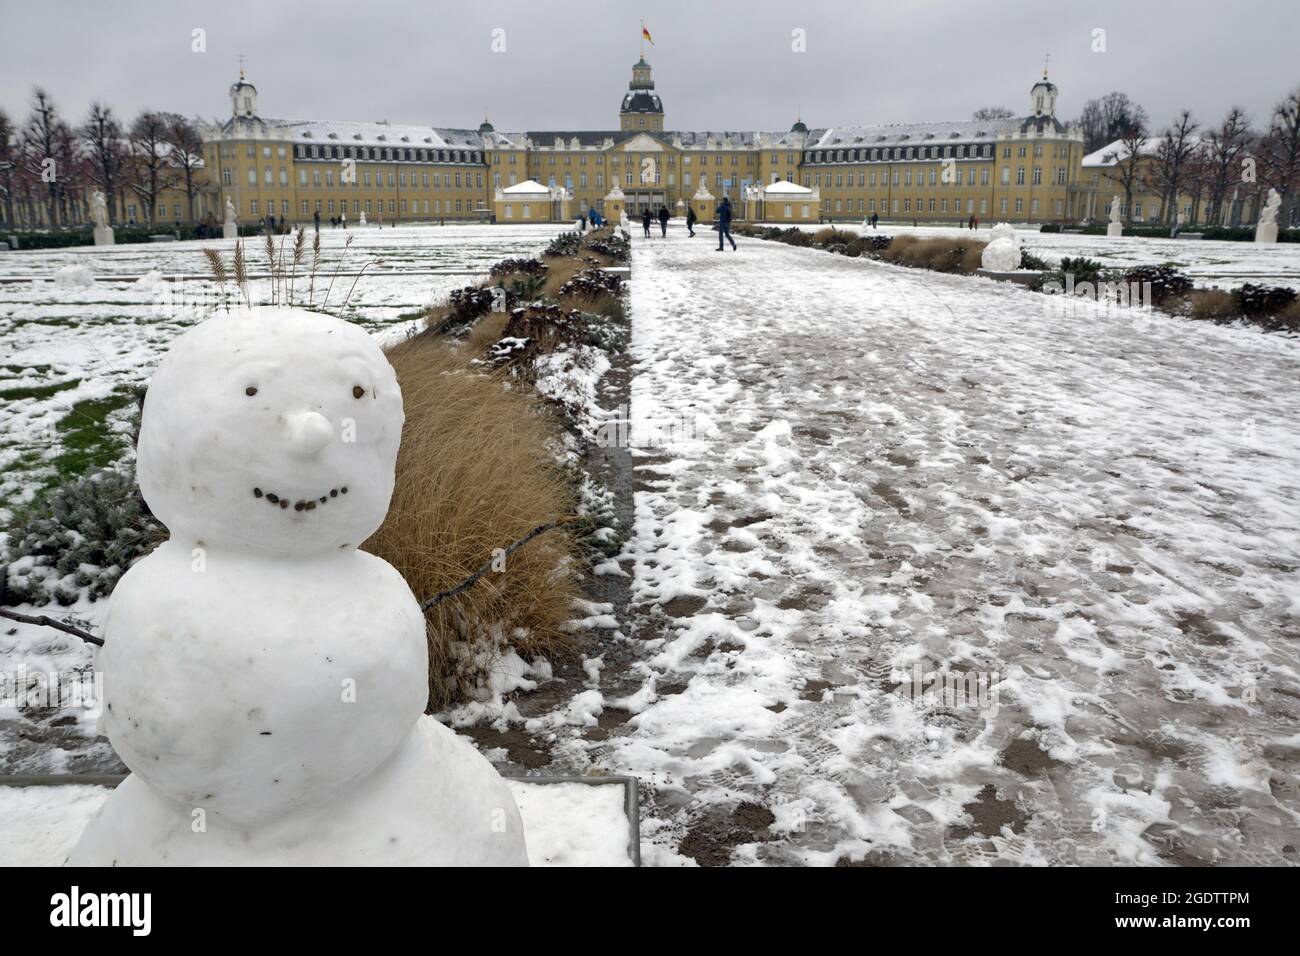 Karlsruhe, Germany: Castle in winter with snowman Stock Photo